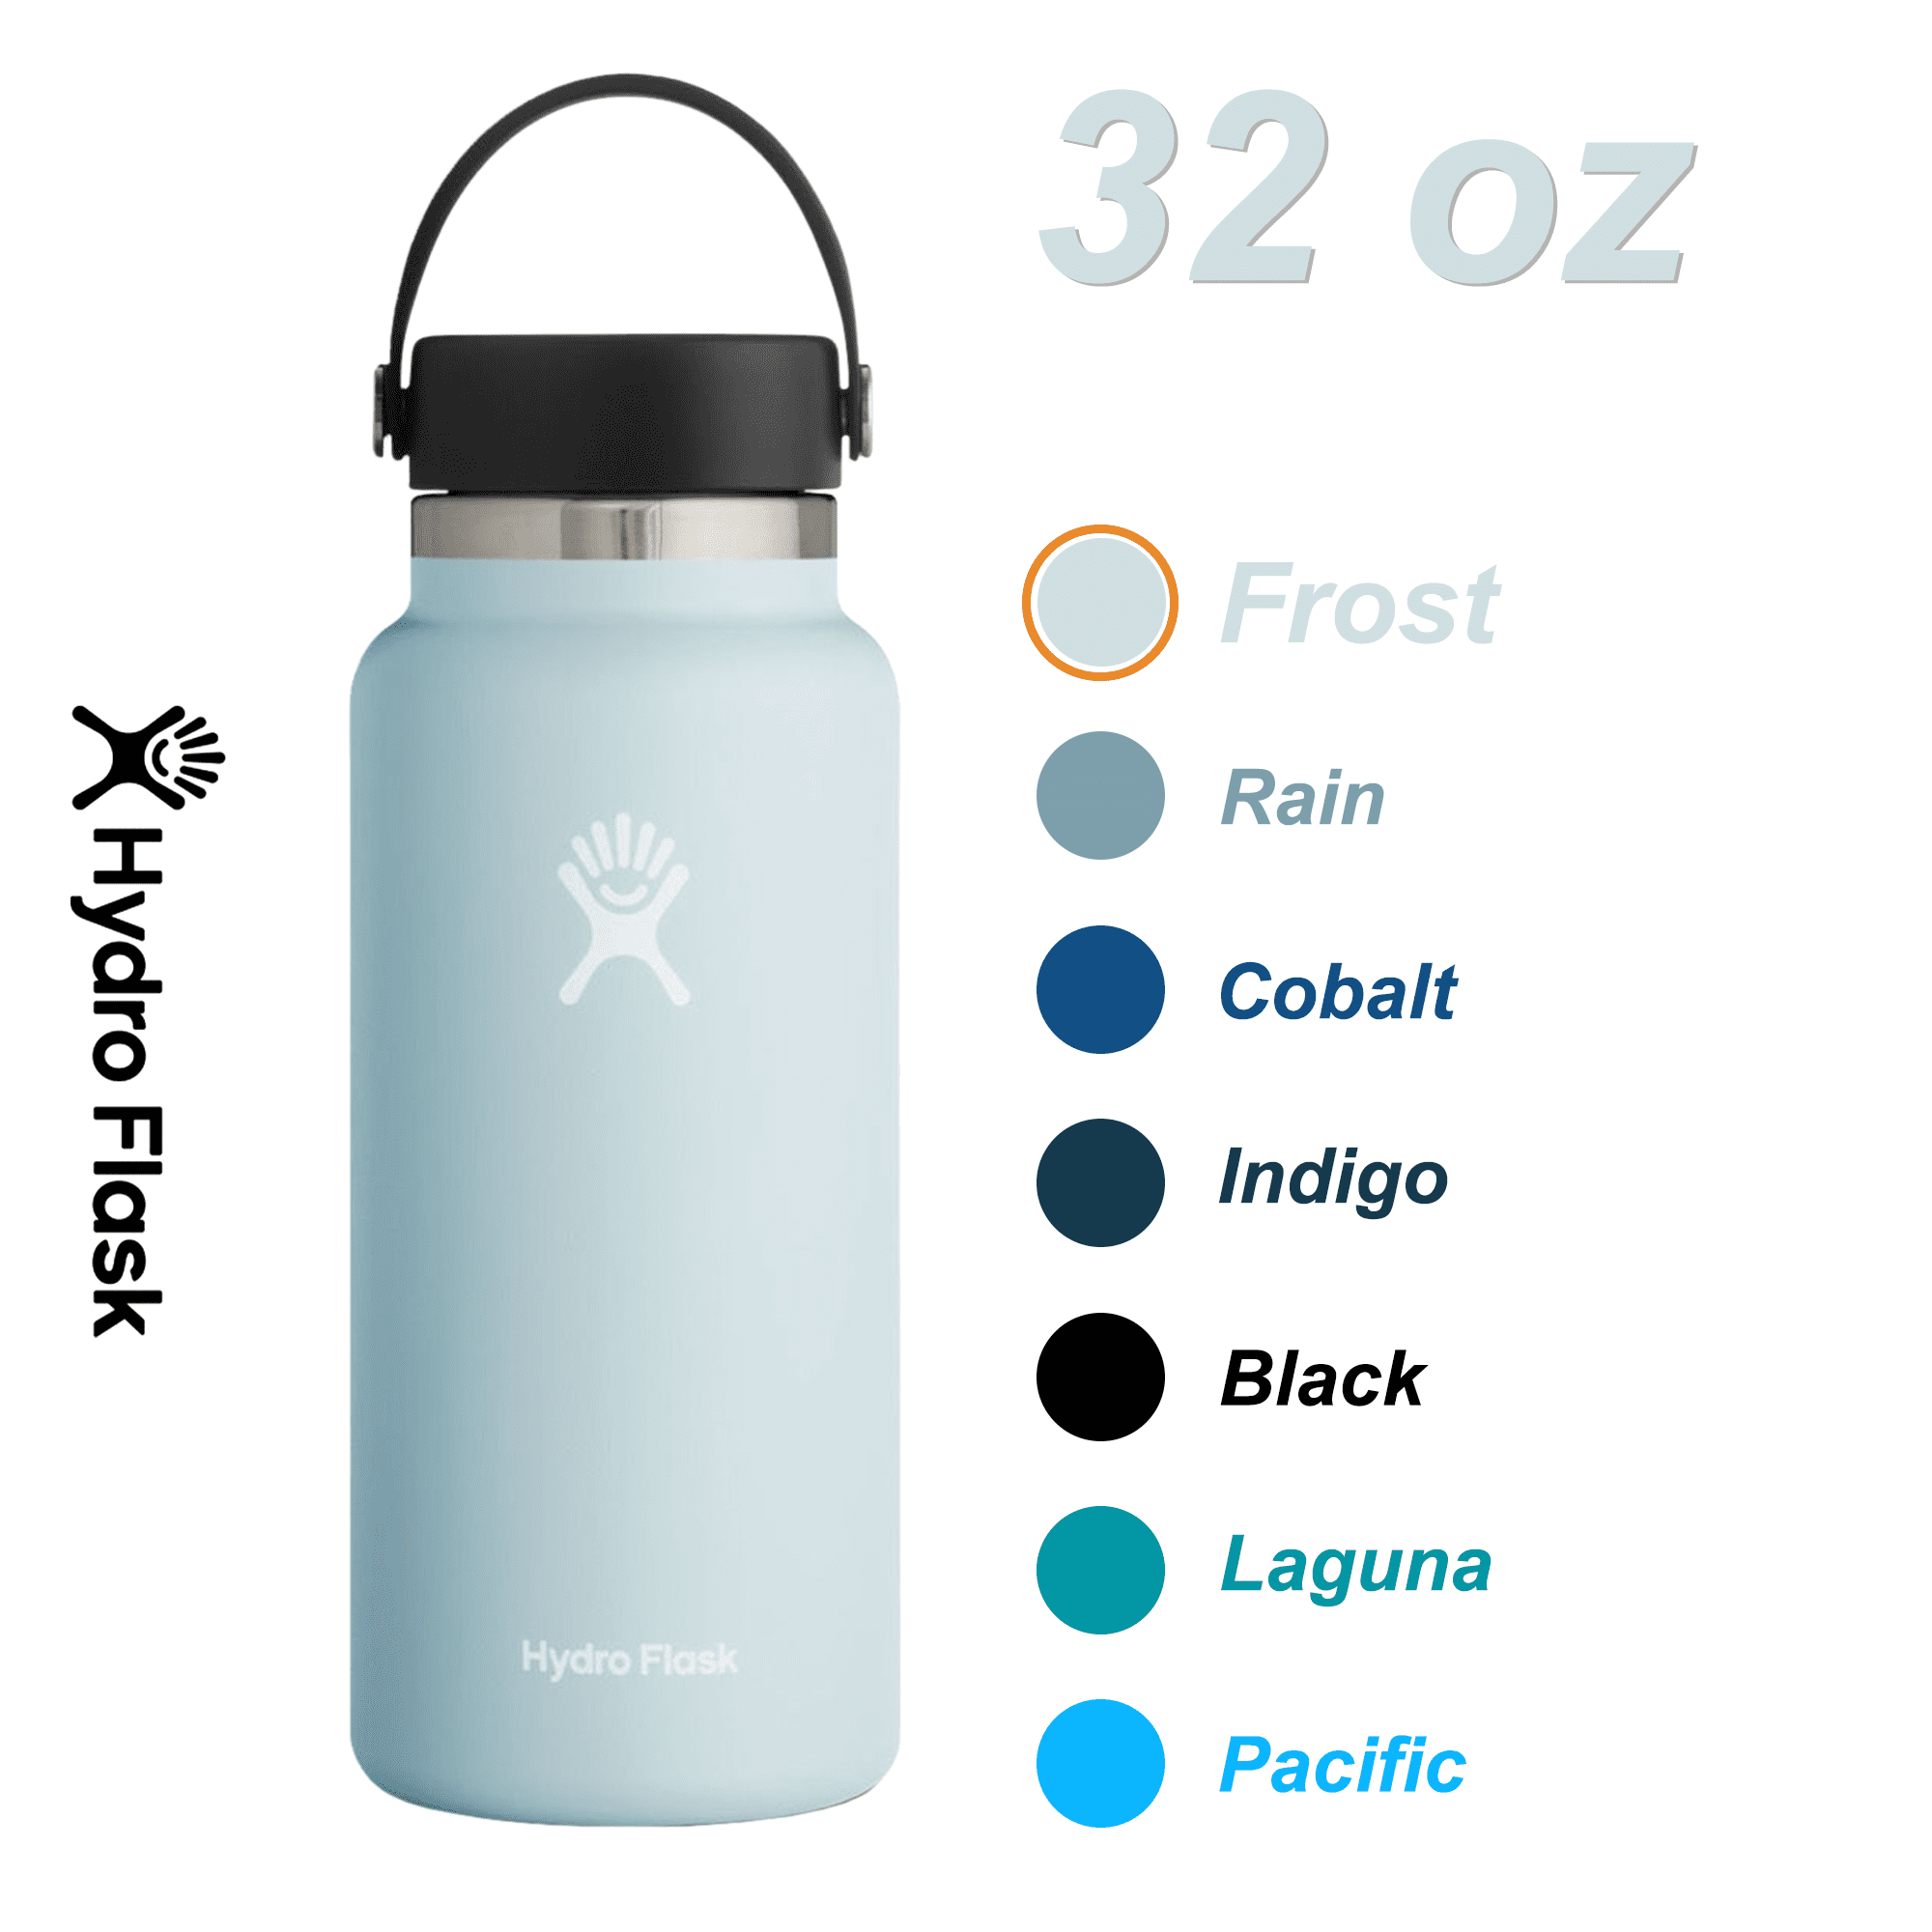 Hydro Flask 32oz Wide Mouth Water Bottle Stainless Steel & Insulated - Leak Proof Cap, White - Walmart.com